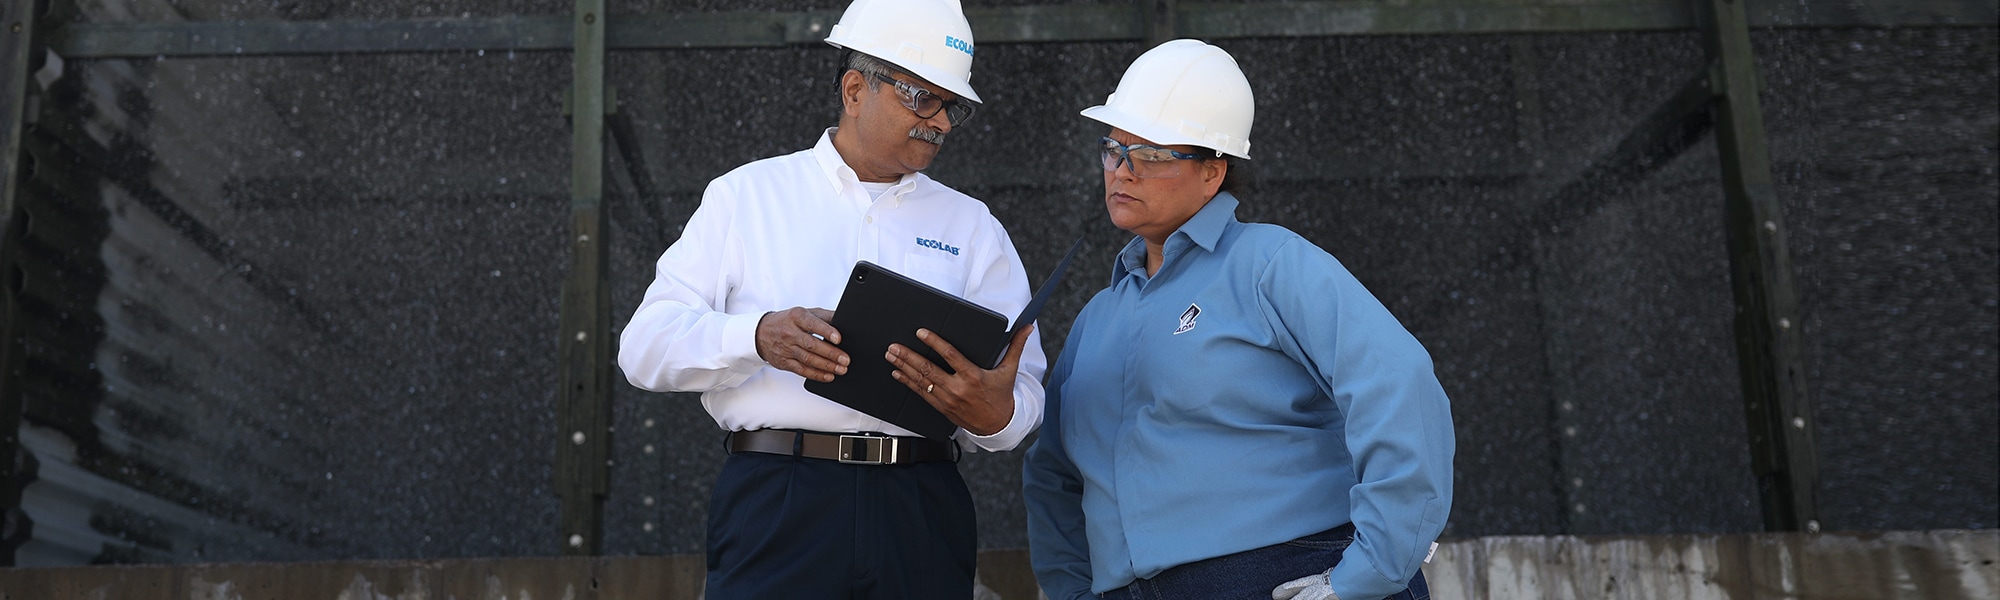 Ecolab Expert talking with a client at a water treatment plant